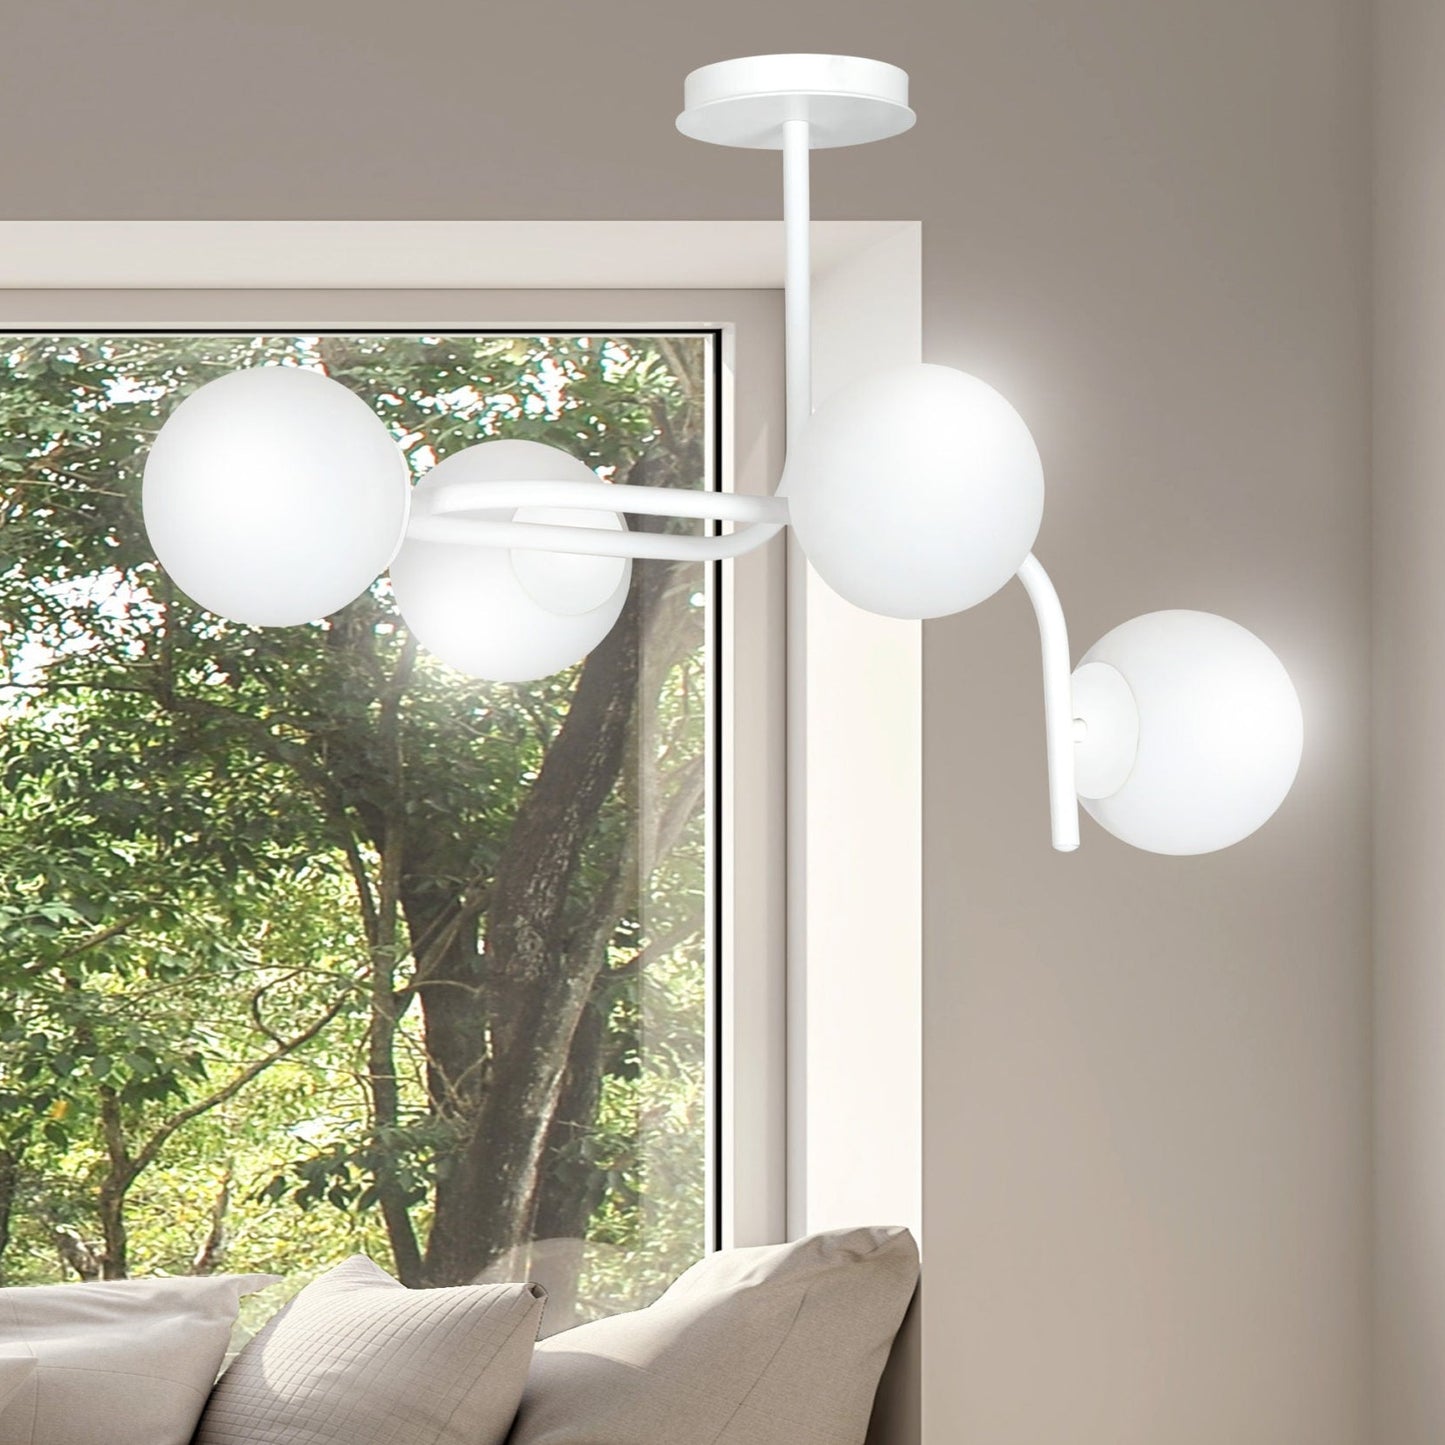 Kalf 4 is modern and contemporary in its design which is inspired by the industrial trend. The white powder coated arms are complimented by four round frosted glass globe shades creating a stand out feature for any living, dining or bedroom.